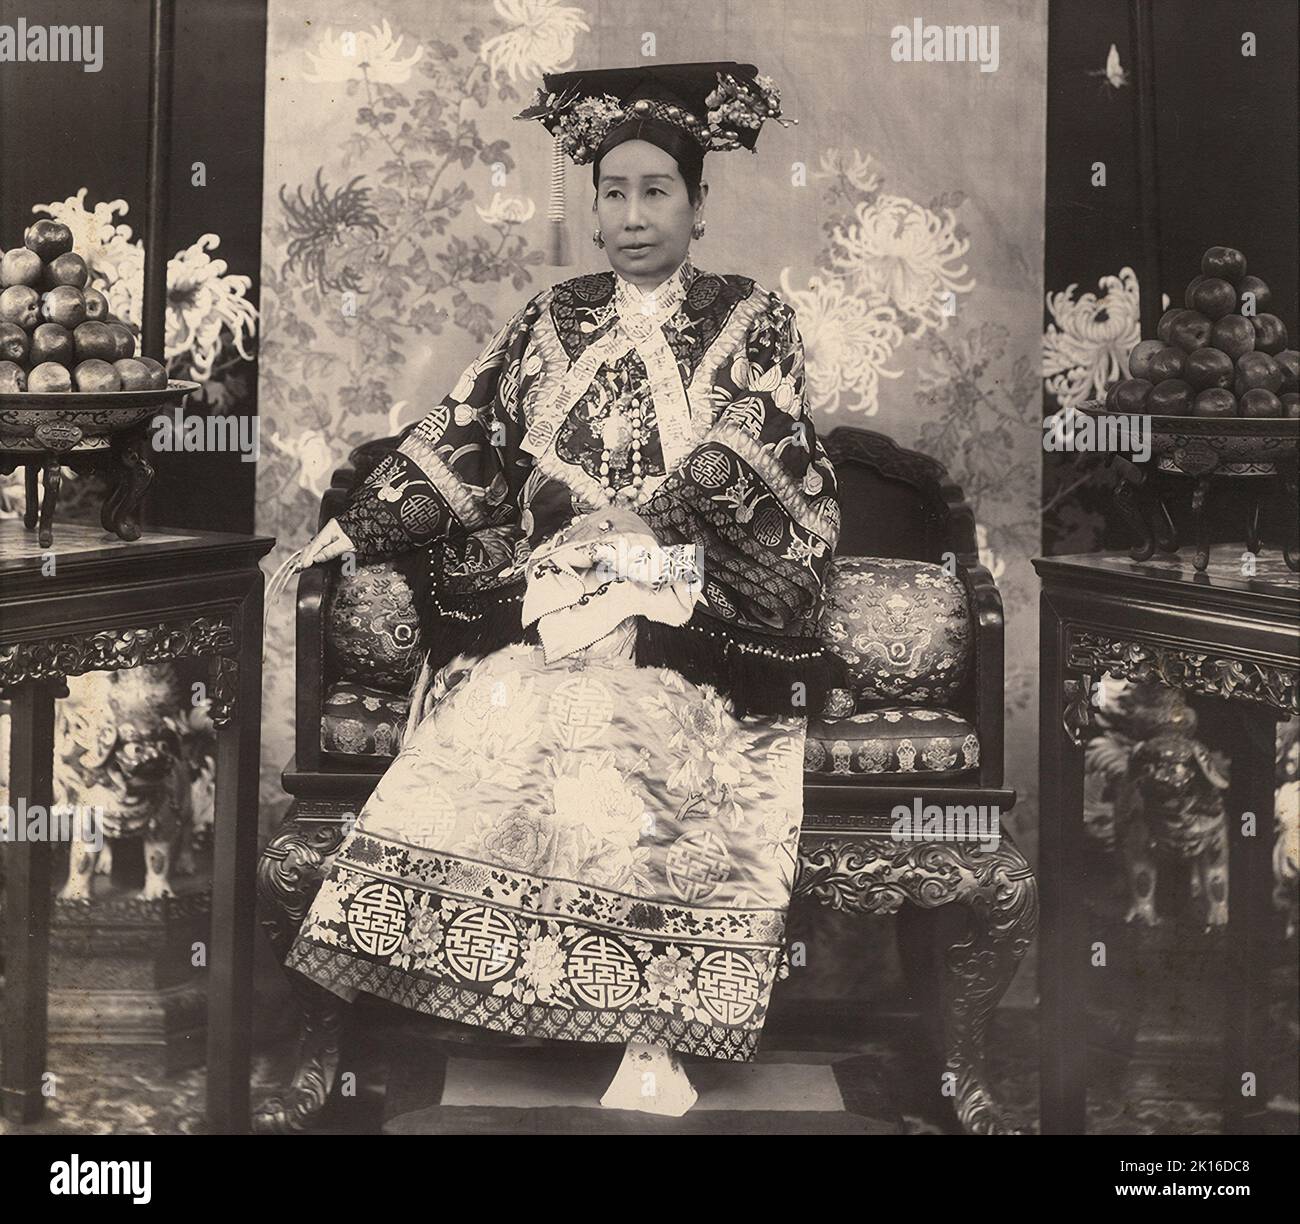 Portarait of Empress Dowager Cixi（1835-1908) , Manchu Yehe Nara clan. She controlled the Chinese government in the late Qing dynasty for 47 years, from 1861 until her death in 1908. Stock Photo